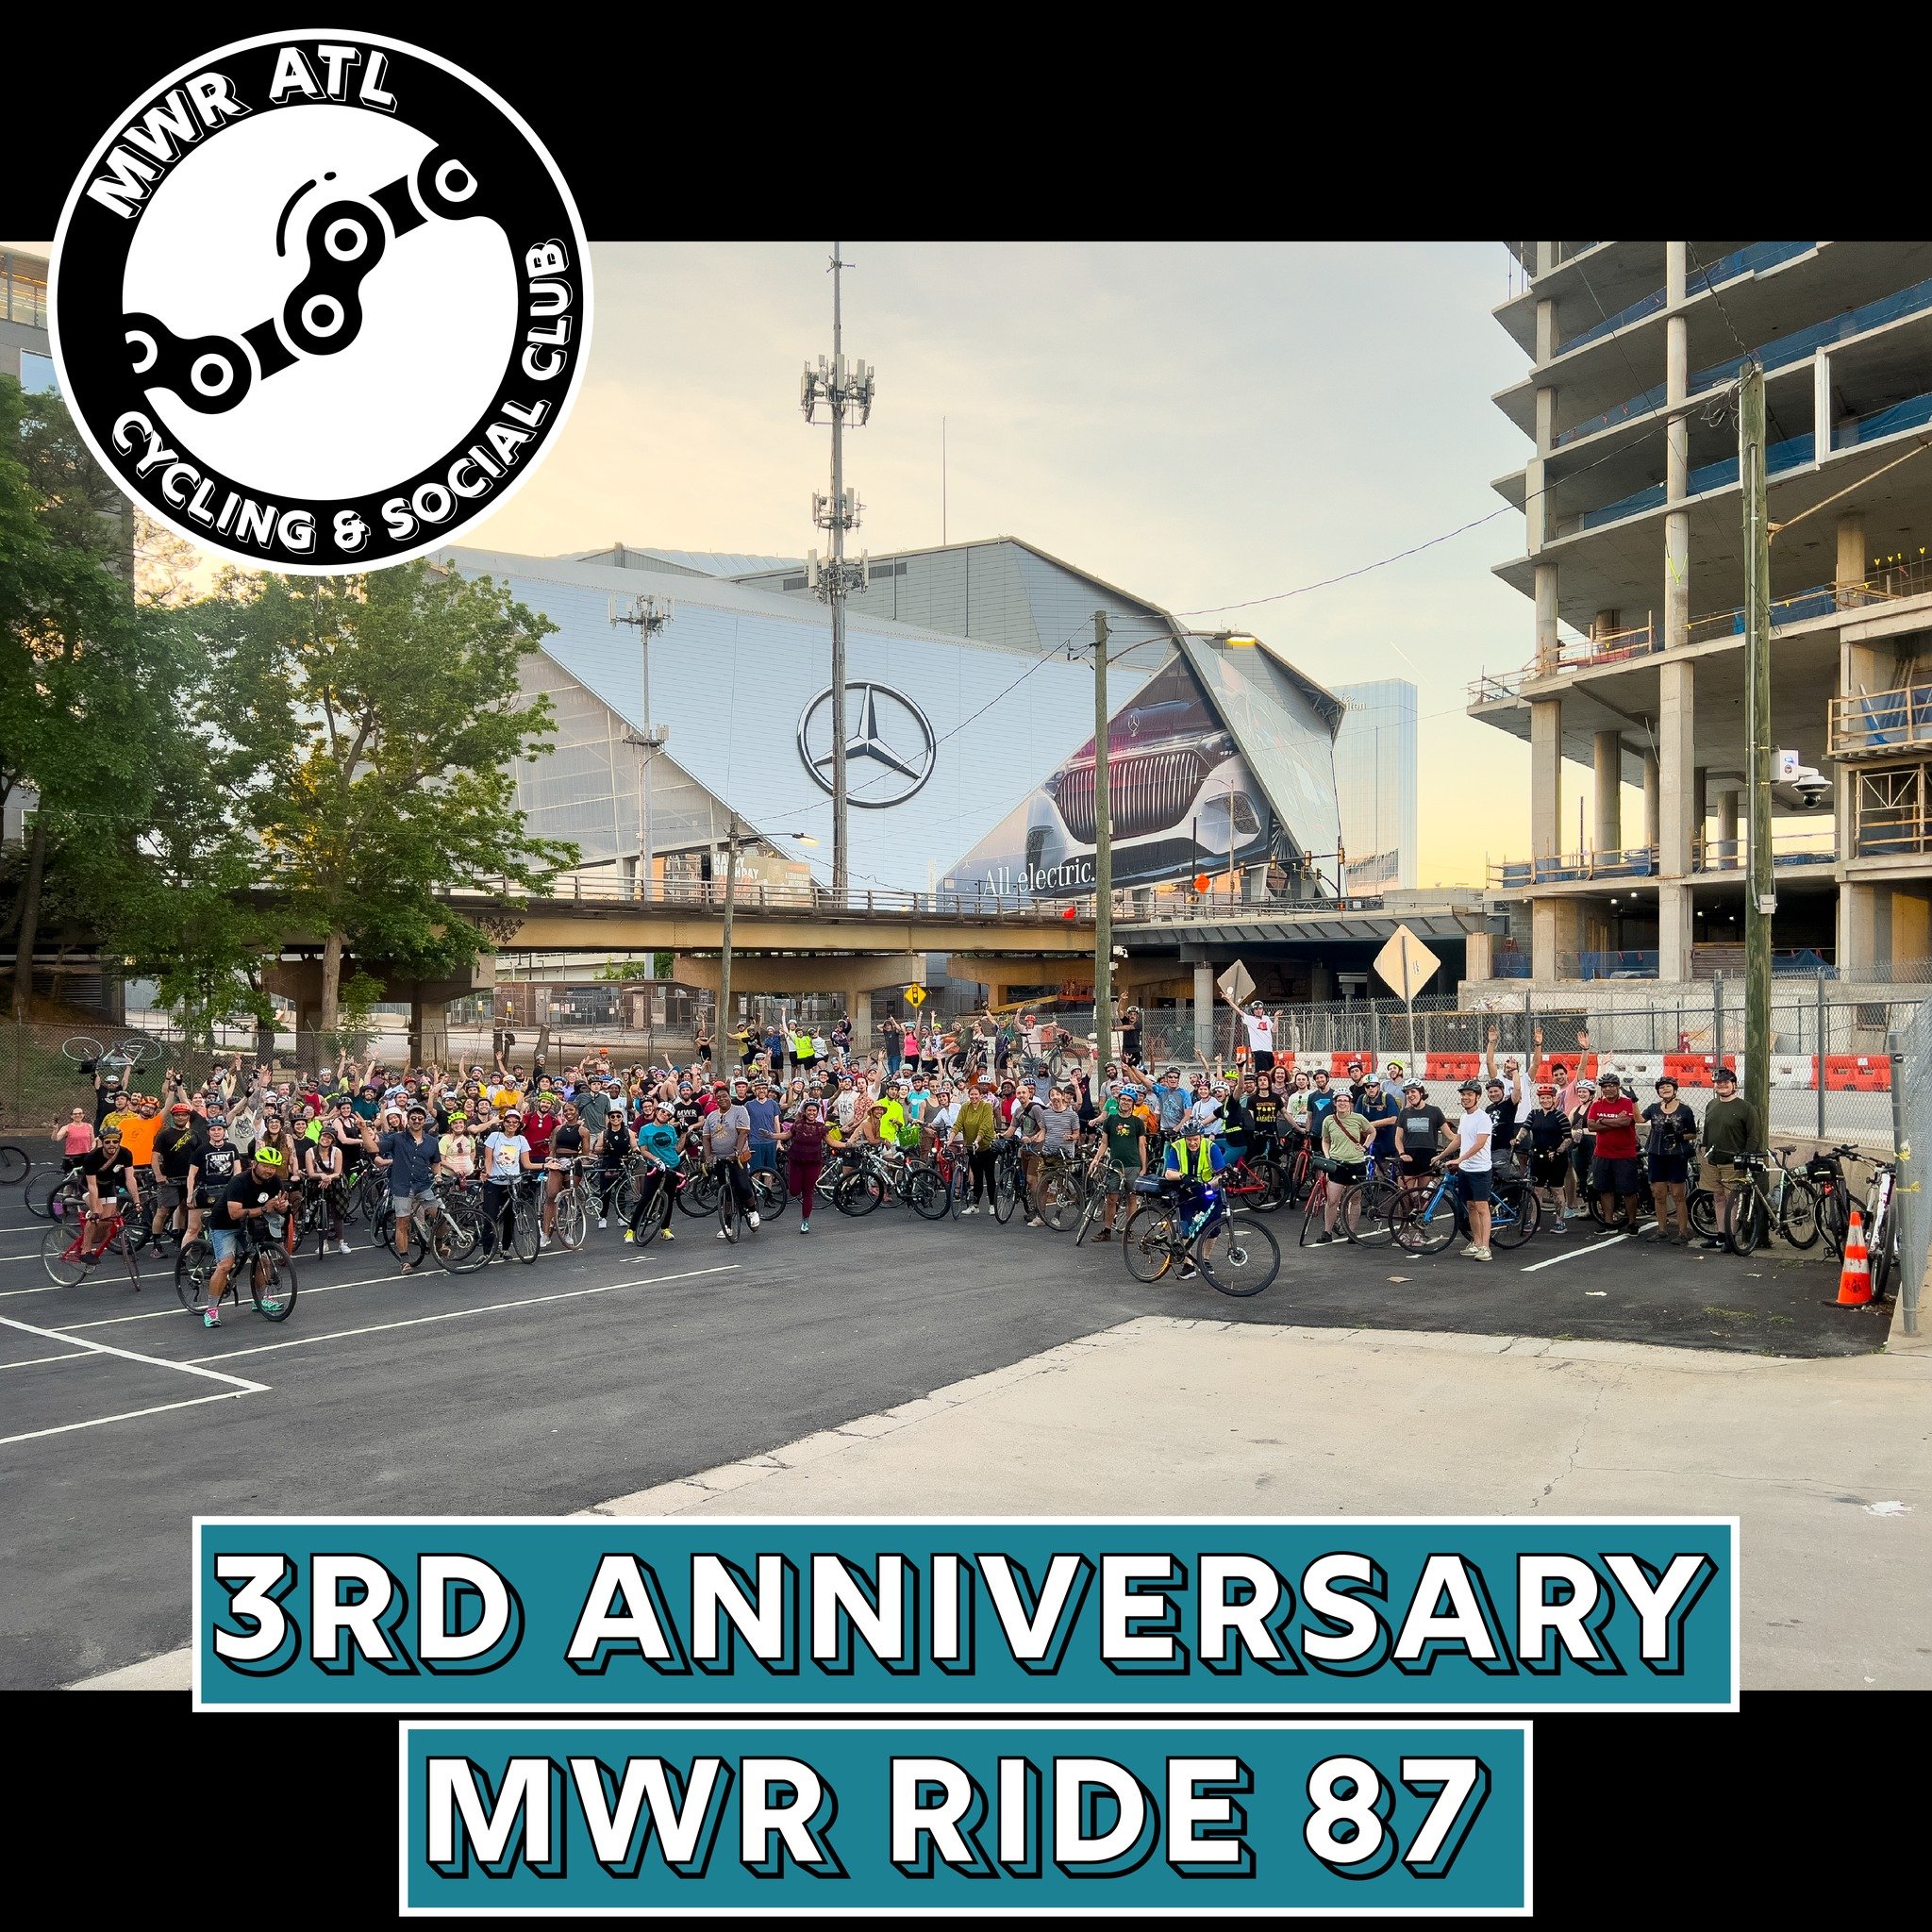 Happy 3rd Anniversary, Midweek Rollers! Cheers to our incredible cycling and social club! 

Atlanta has an amazing cycling community and each one of you brings something unique and wonderful to our rides.

Thank you for your support and making these 